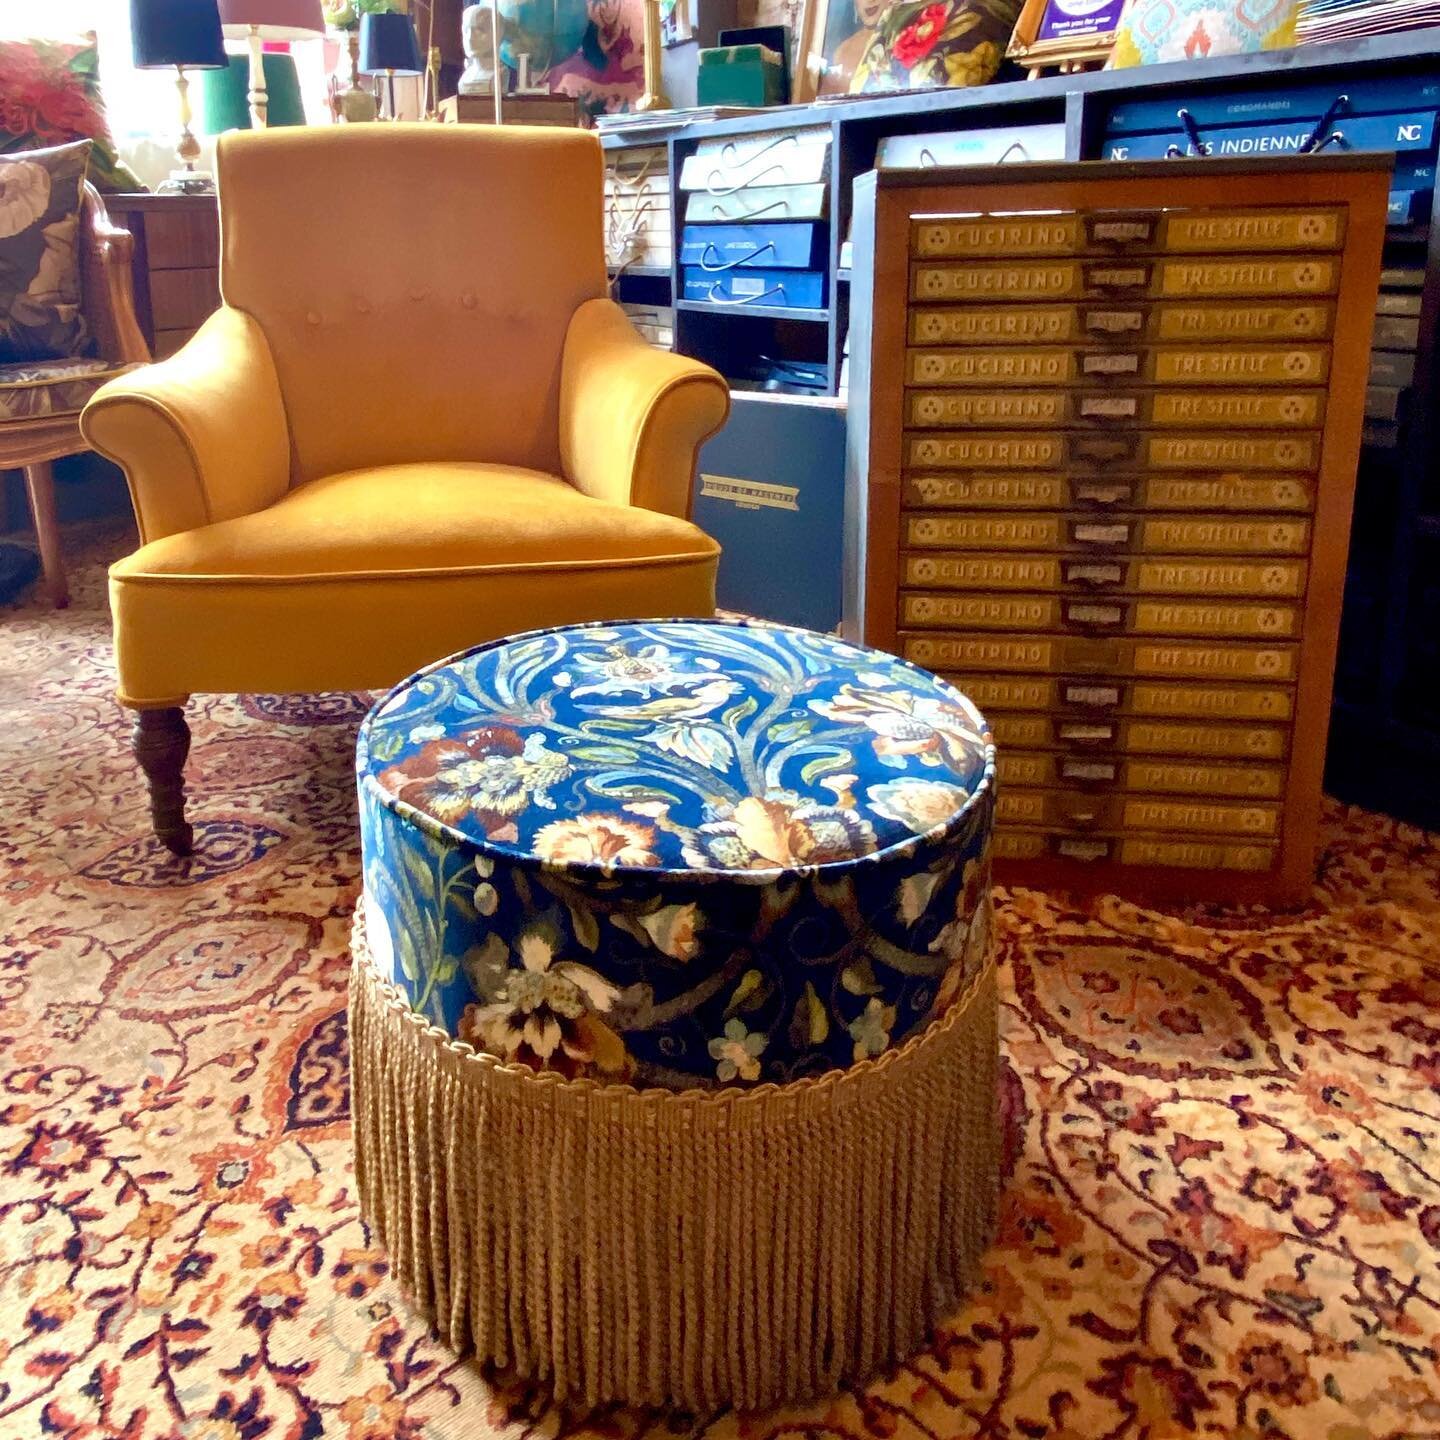 Some new arrivals in the store today... clients own chair reupholstered in Velutto Stretto velvet by @designersguild and this footstool upholstered in Gaia Midnight by @houseofhackney printed velvet with Bullion fringe - almost too good to put your f